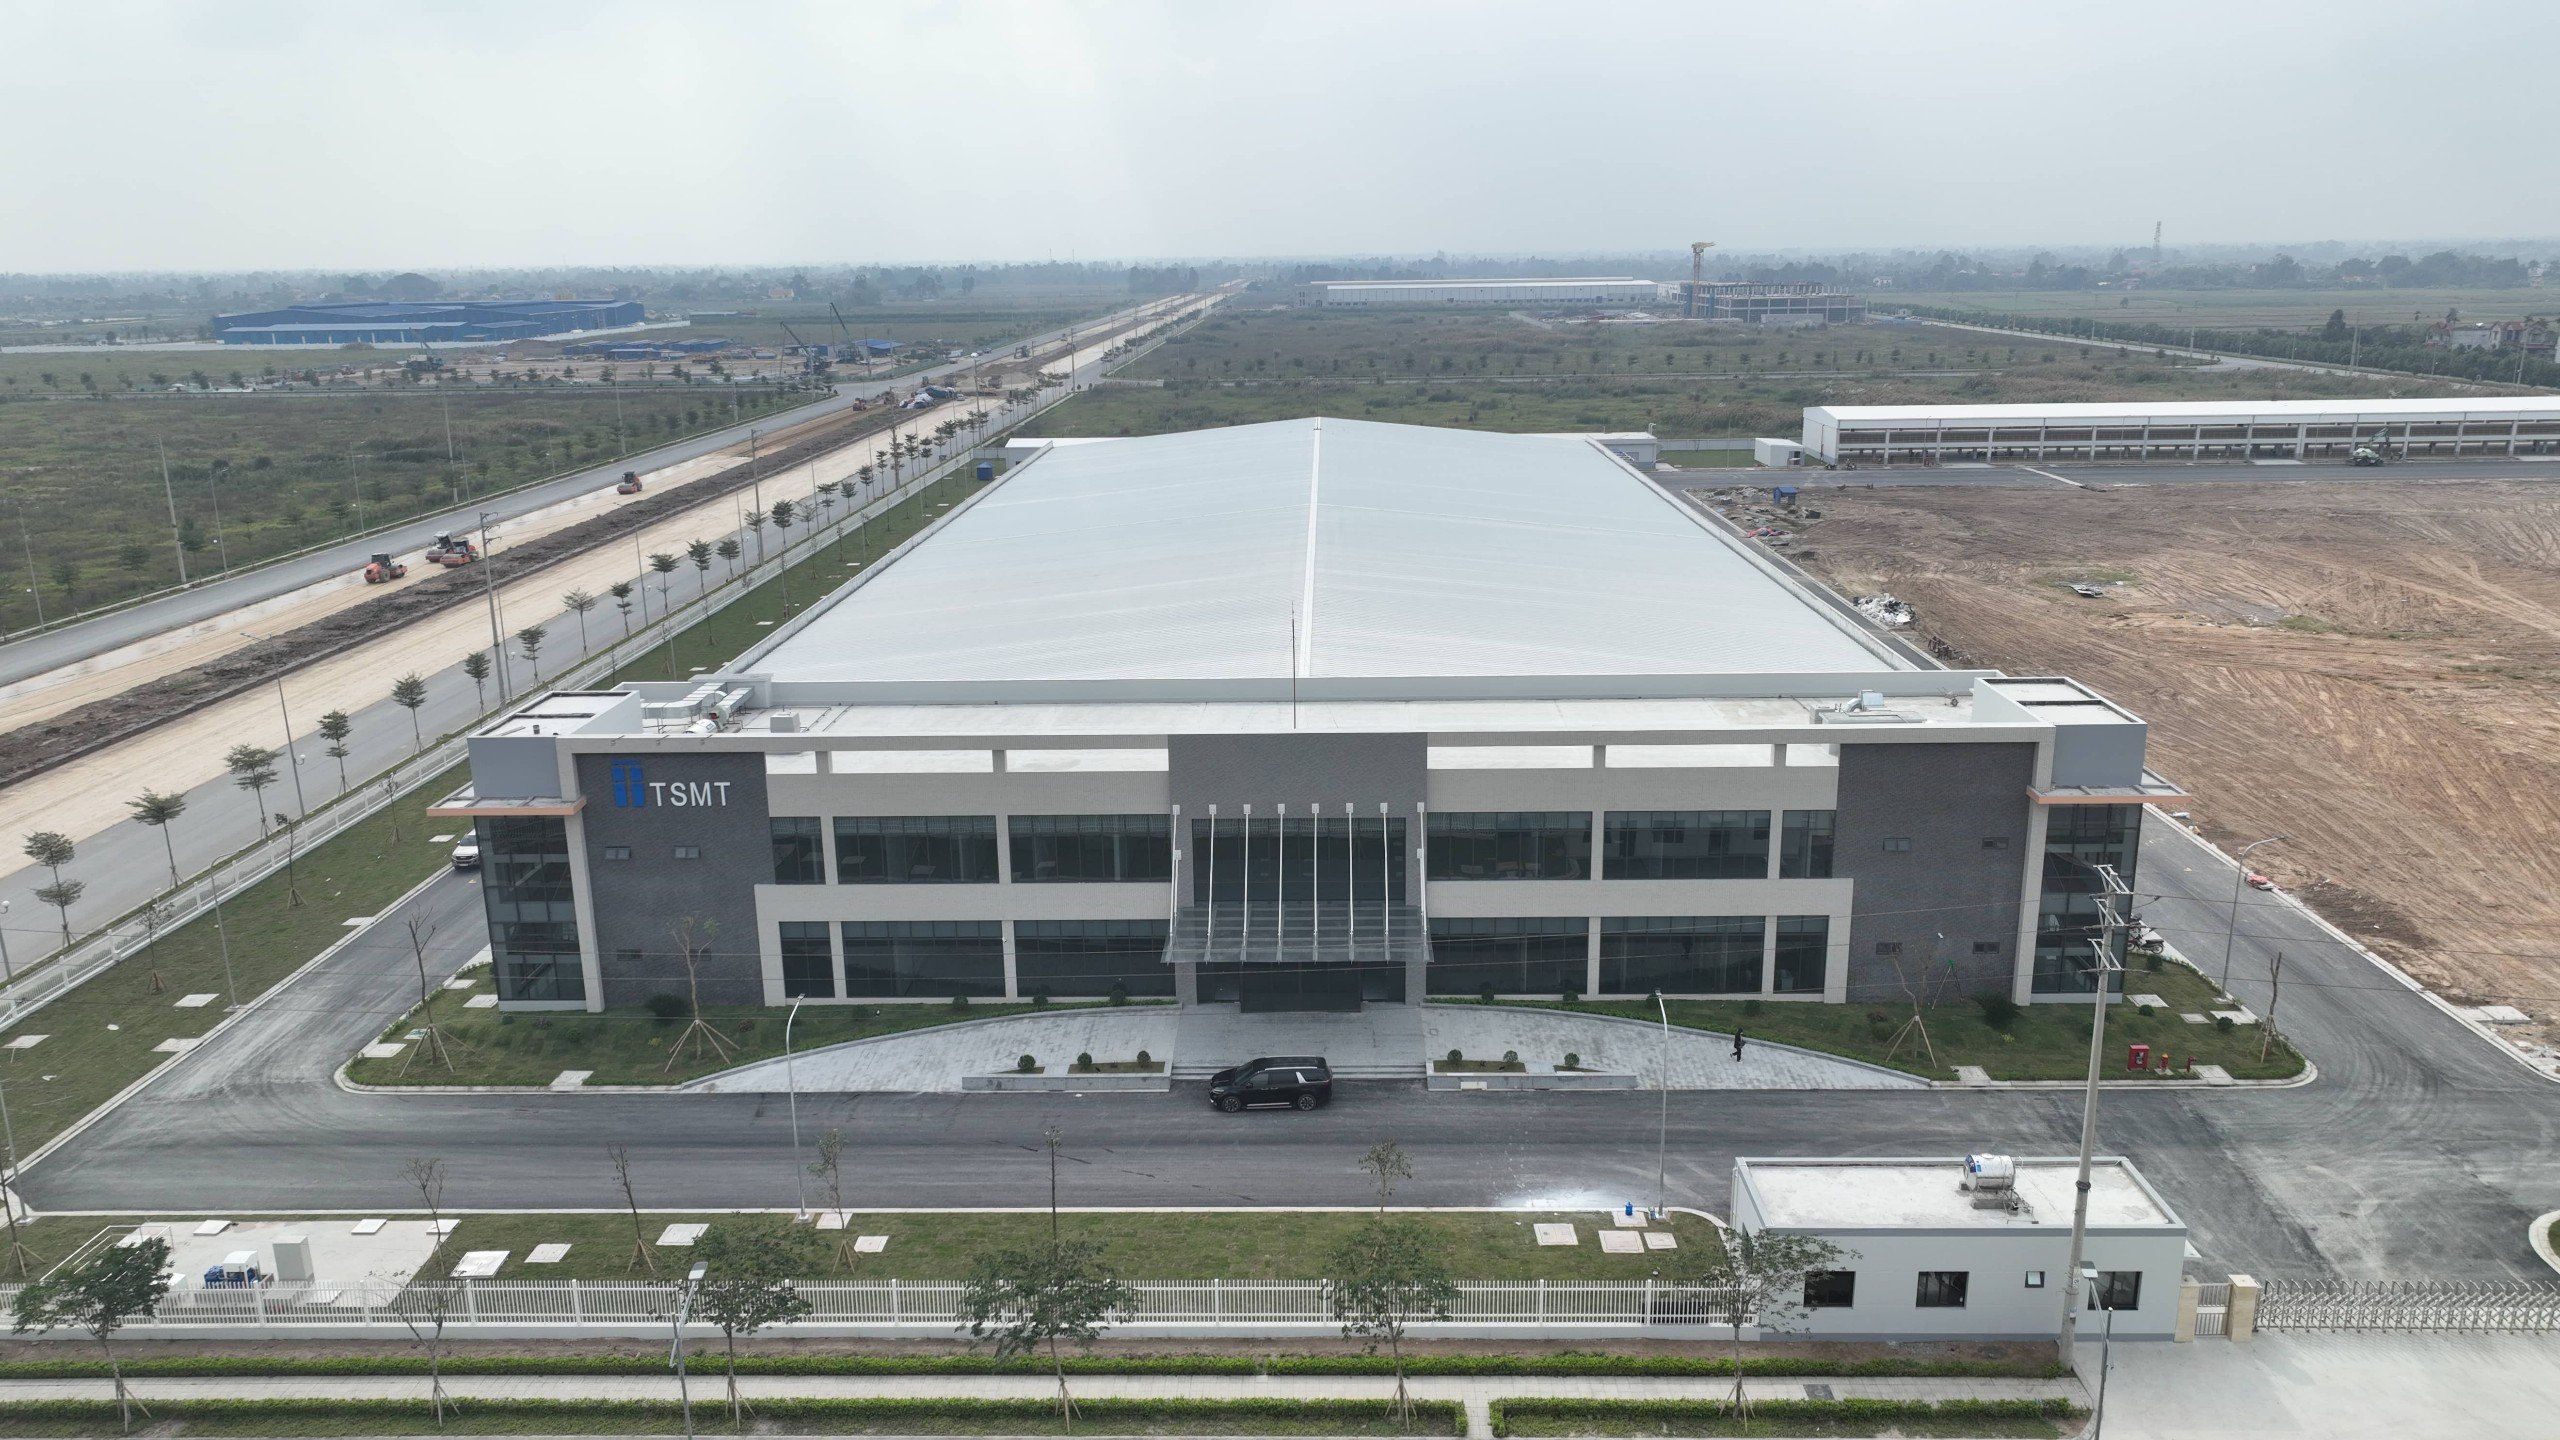 VIETNAM TSMT FACTORY PROJECT ENTERED THE COMPLETION PHASE